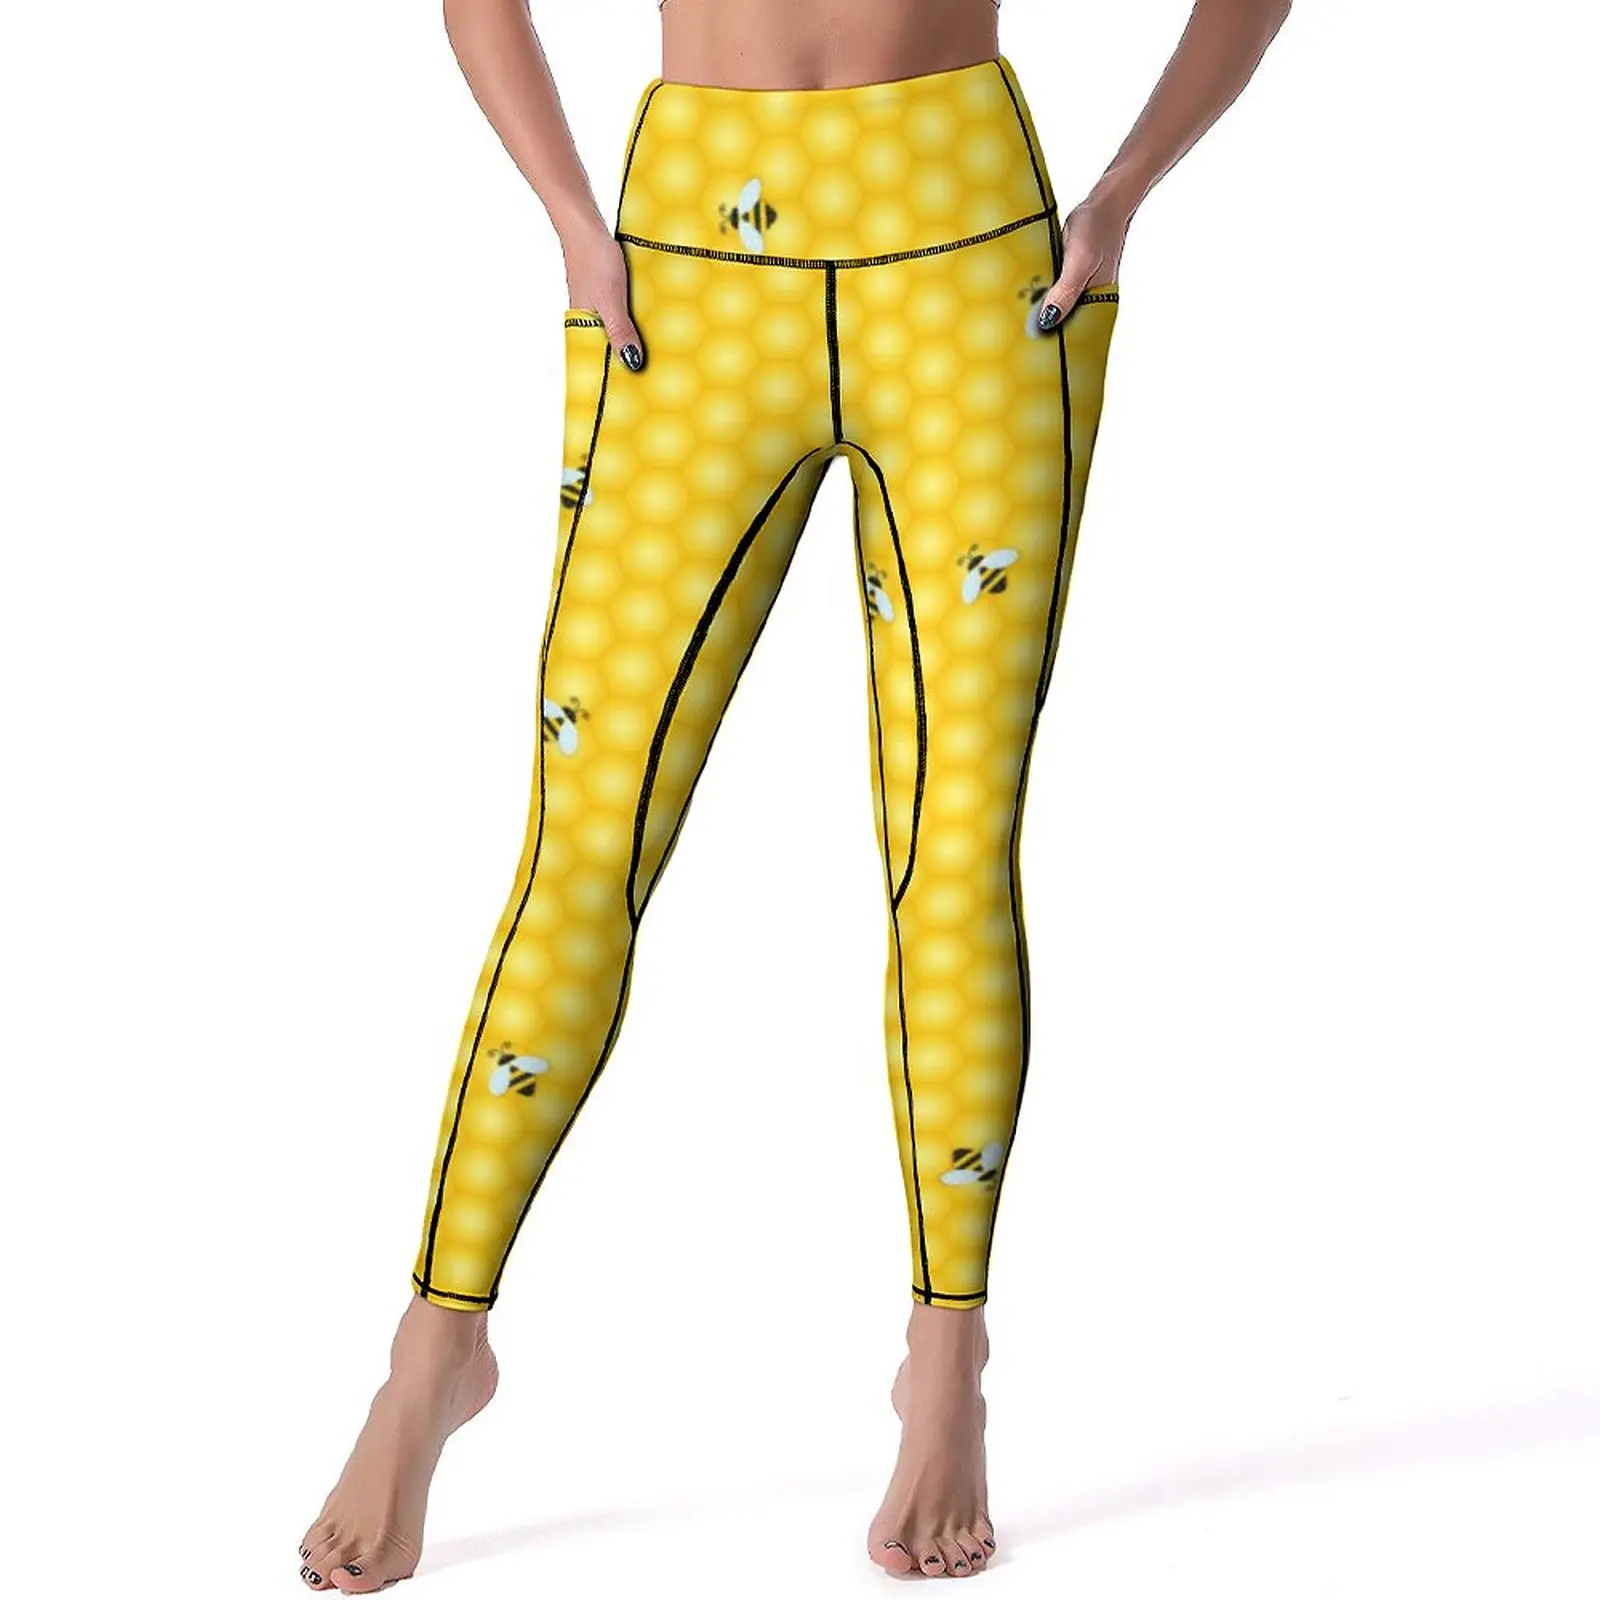 

Bumble Bees Yoga Pants Pockets Yellow Honeycomb Leggings Sexy Push Up Cute Yoga Sports Tights Quick-Dry Fitness Gym Leggins